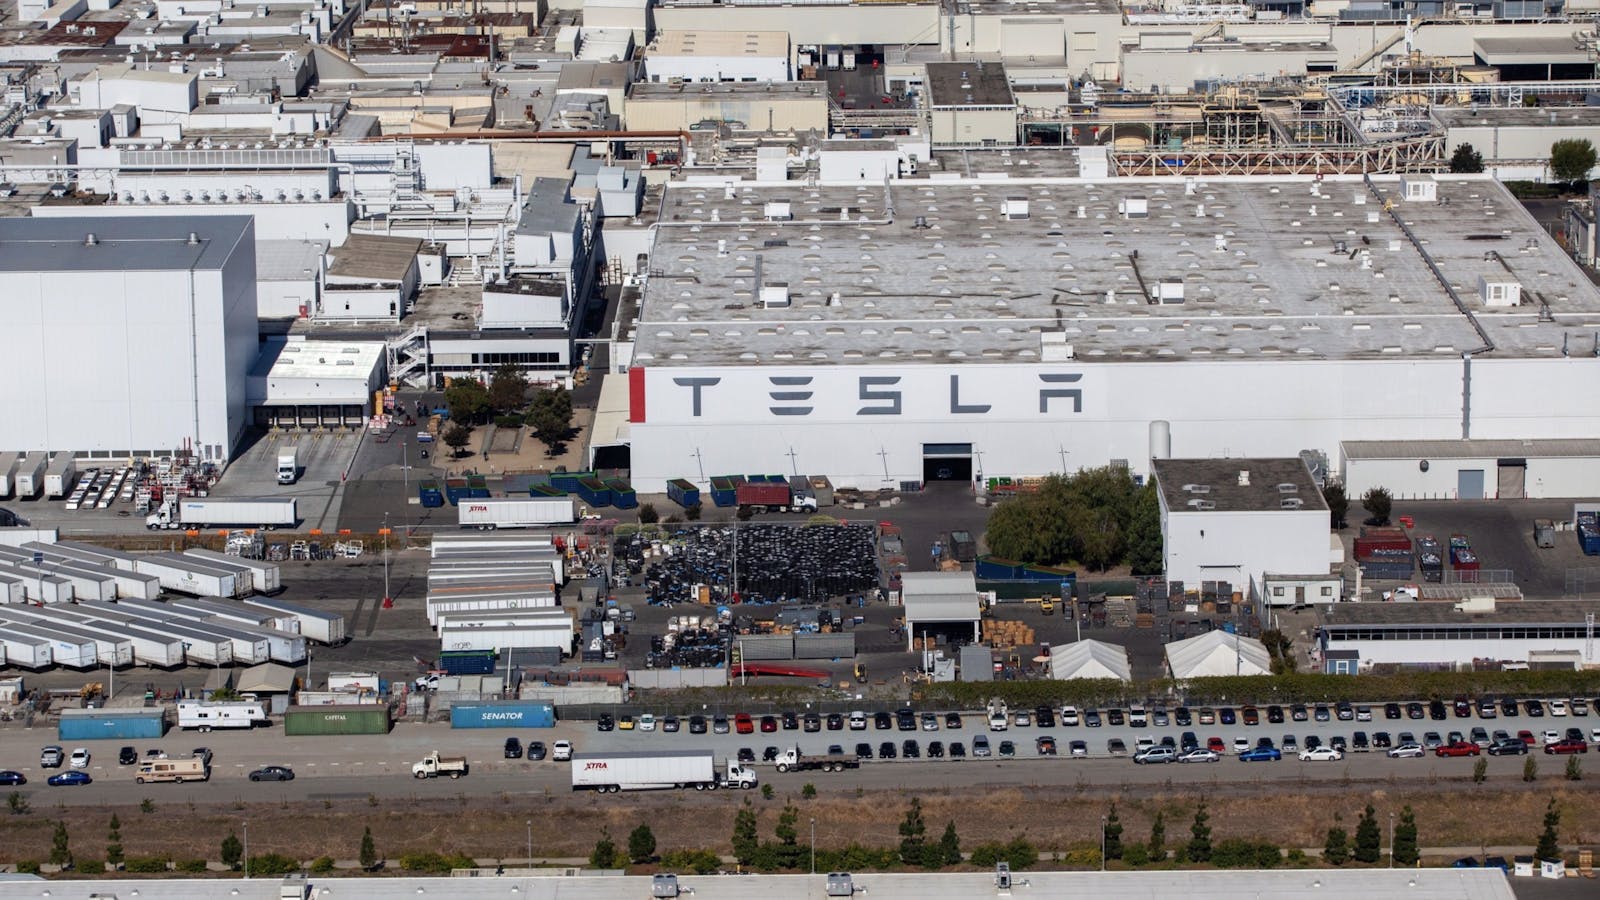 Tesla's Fremont, Calif. factory. Photo by Bloomberg